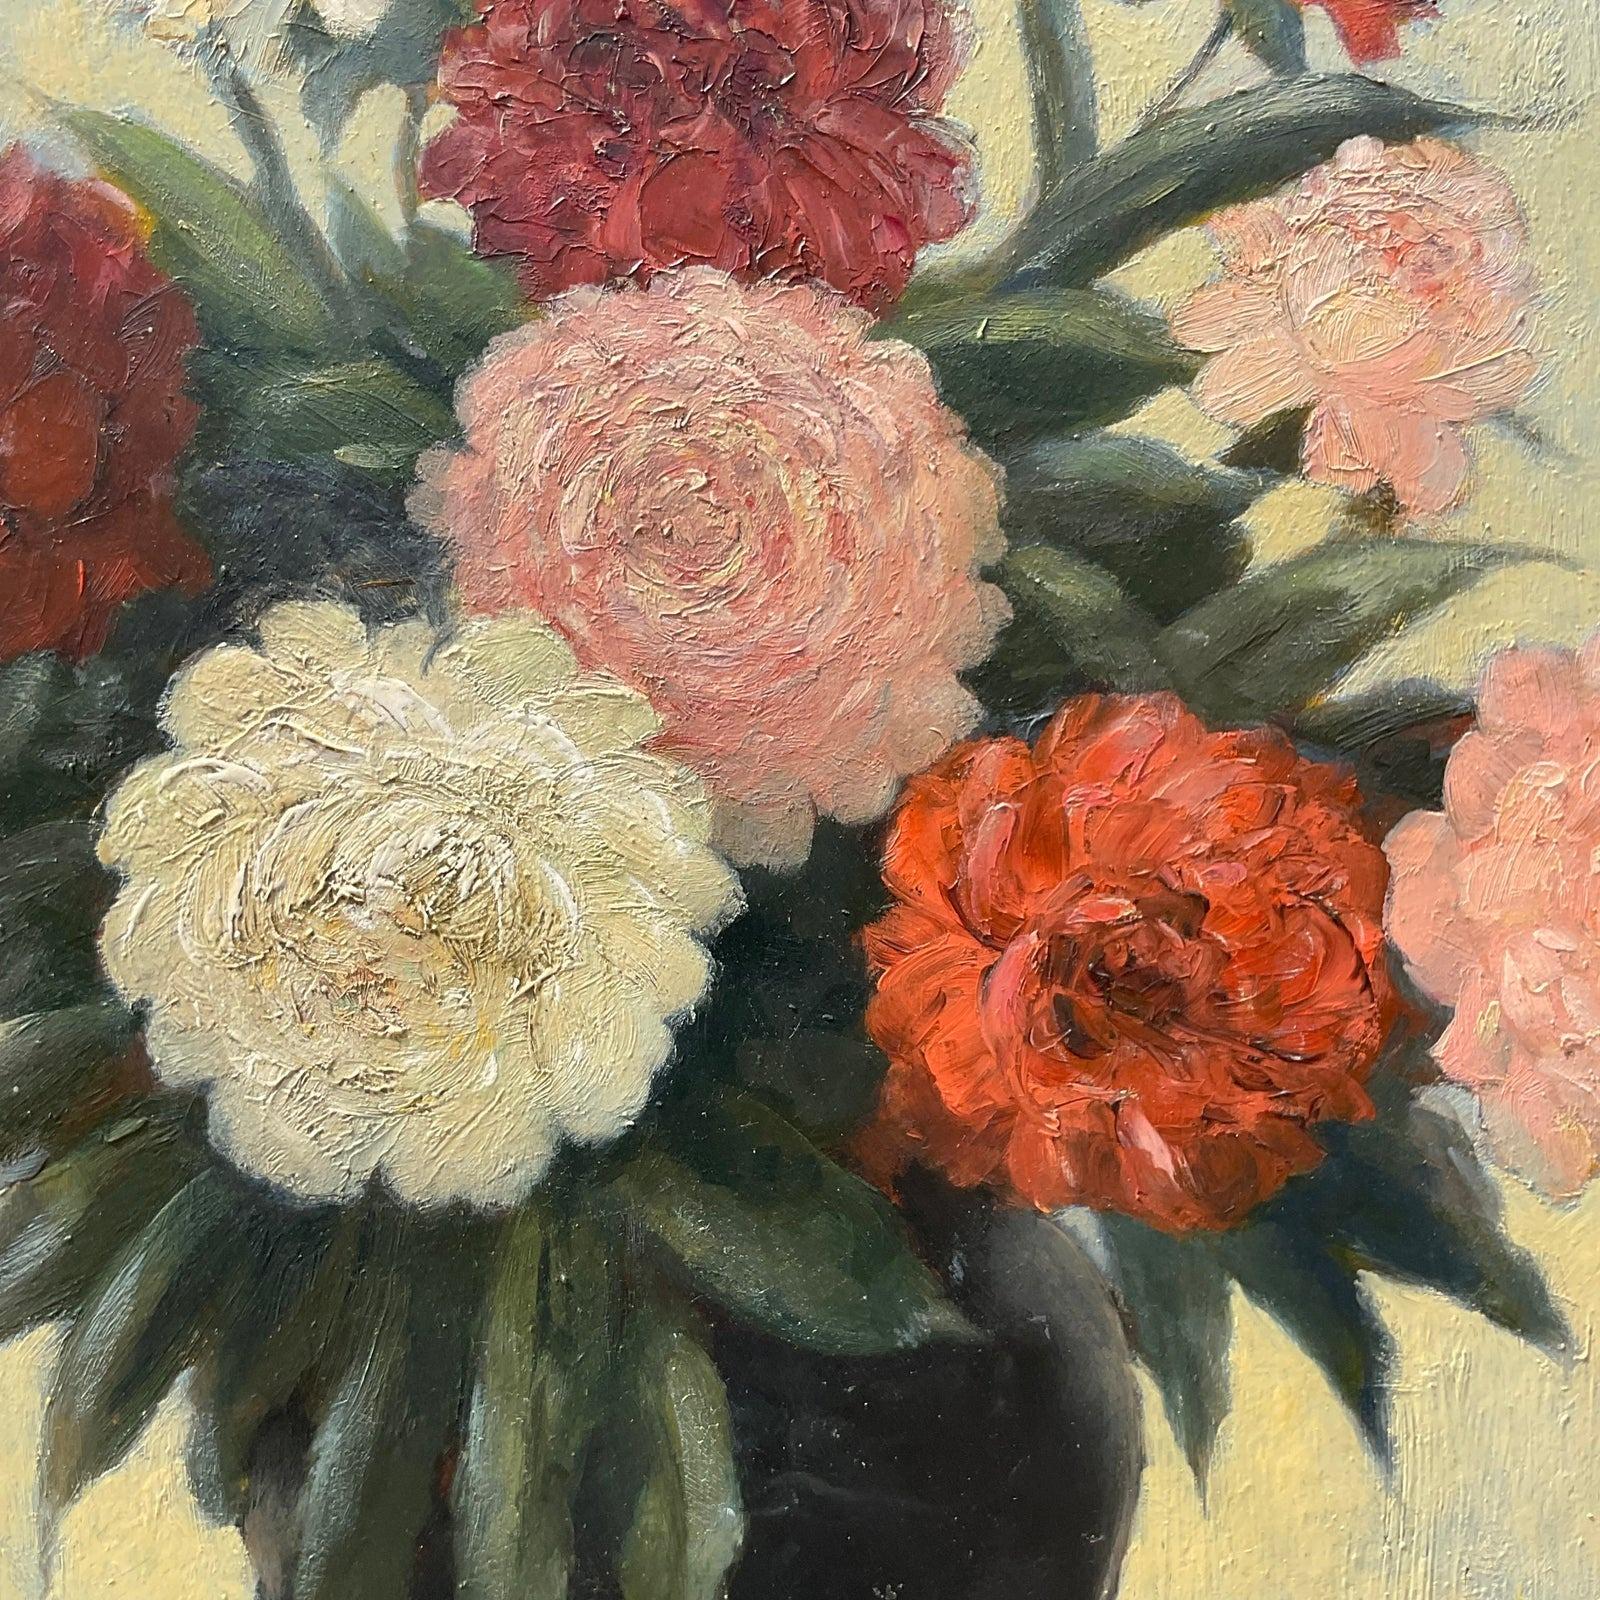 A fantastic vintage Boho original oil painting. A beautiful floral in bright clear colors. Signed by the artist. Acquired from a Palm Beach estate.